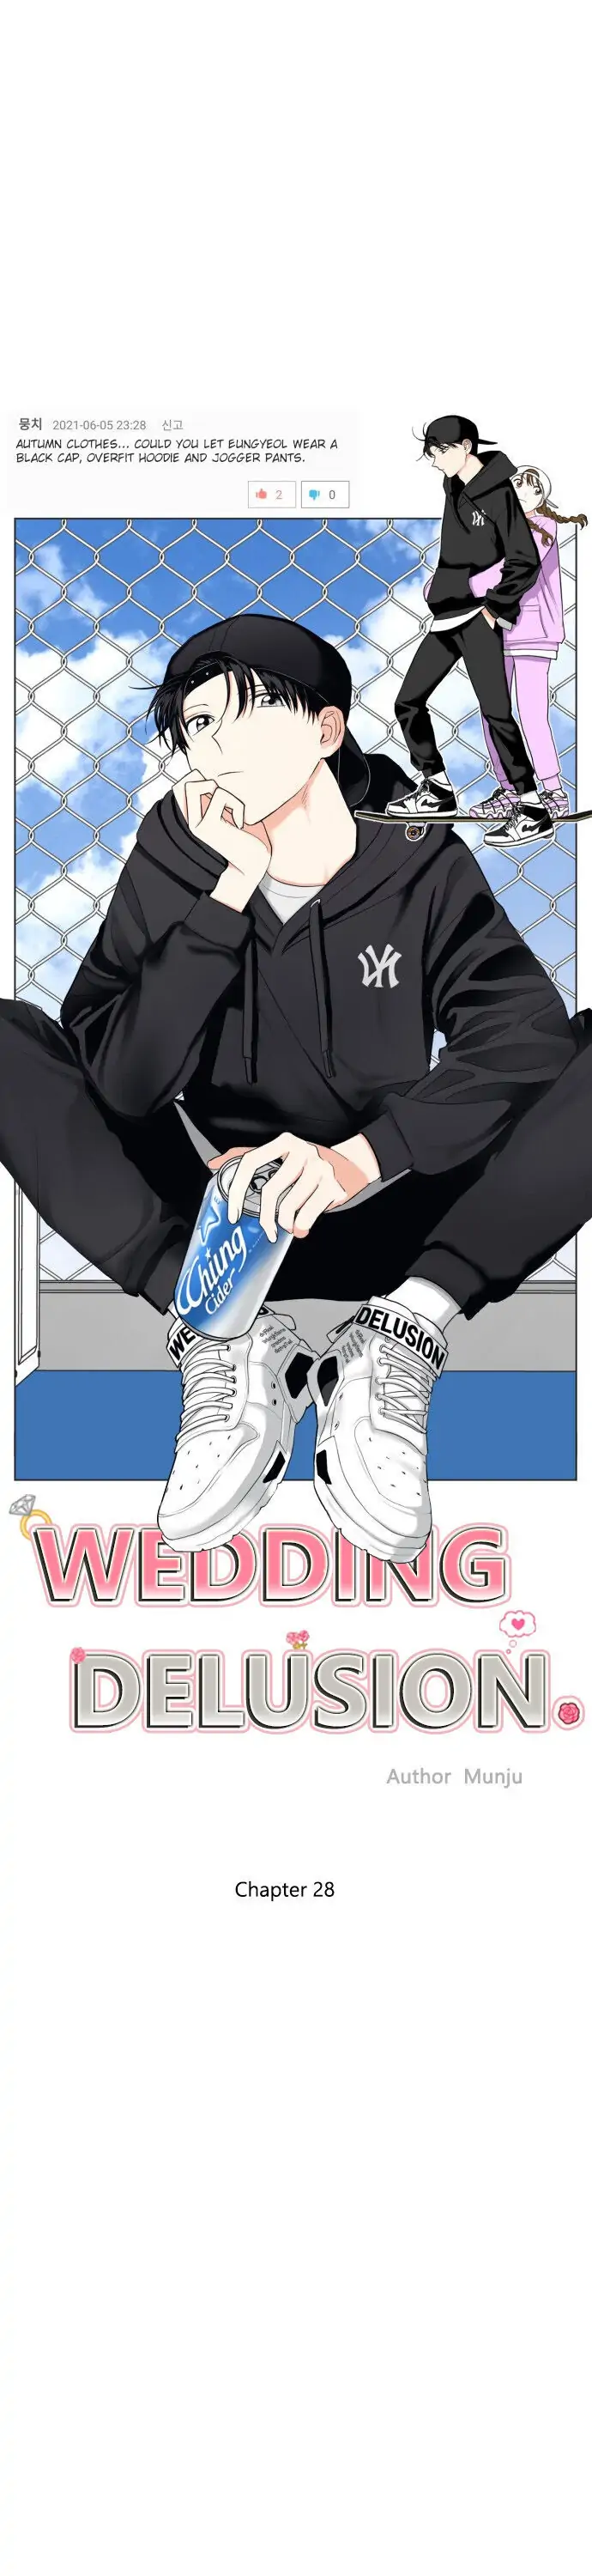 Wedding Delusion chapter 28